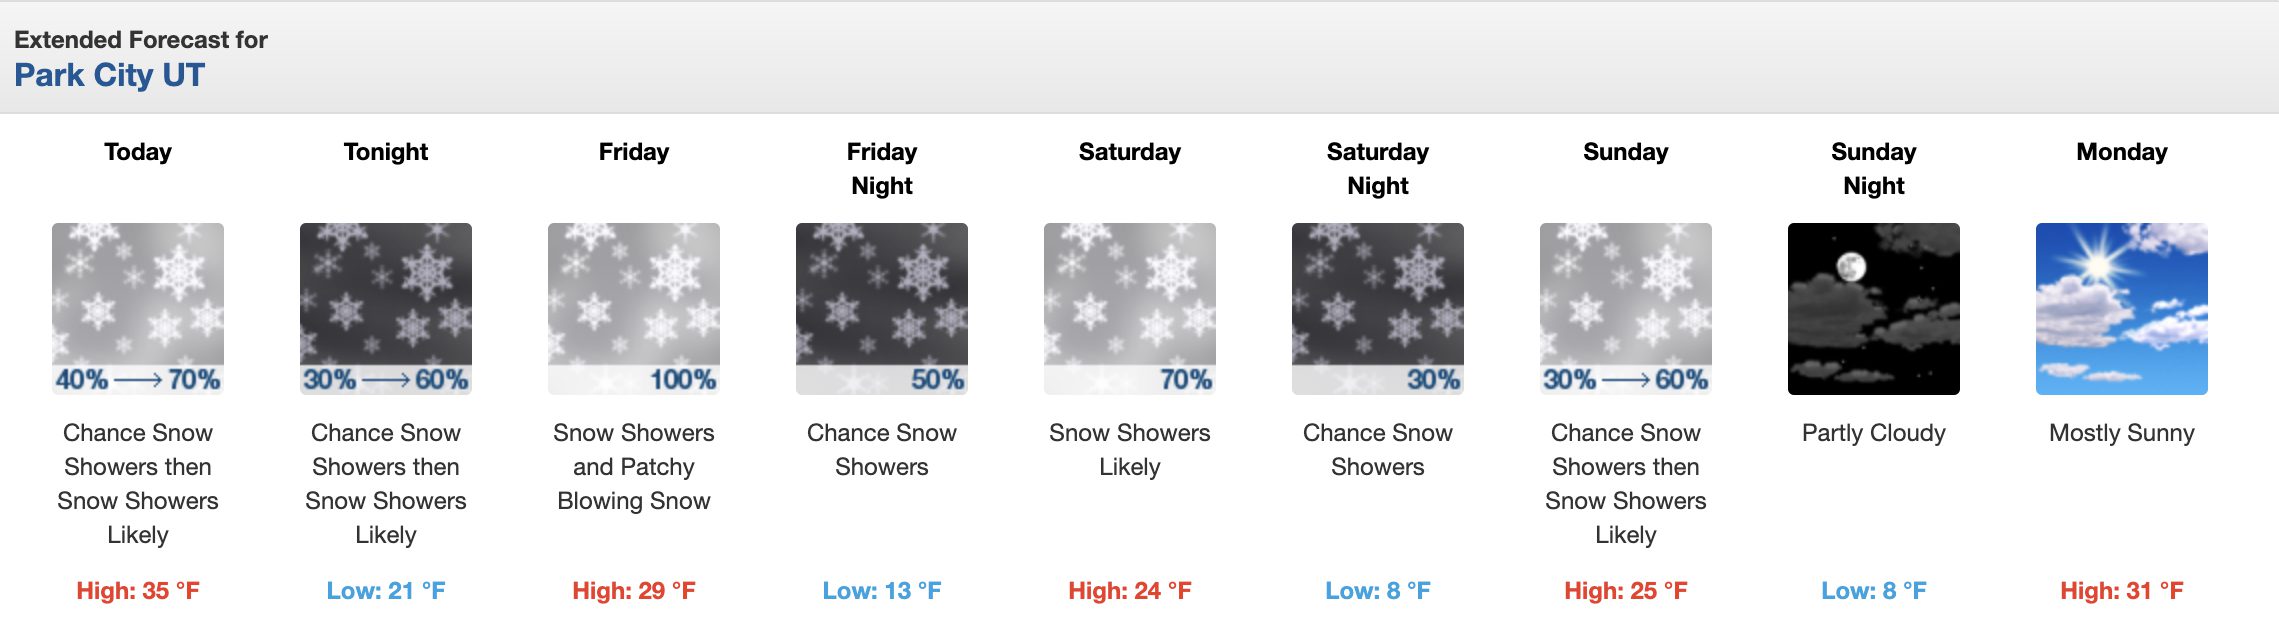 7-Day forecast for Park City from the National Weather Service.